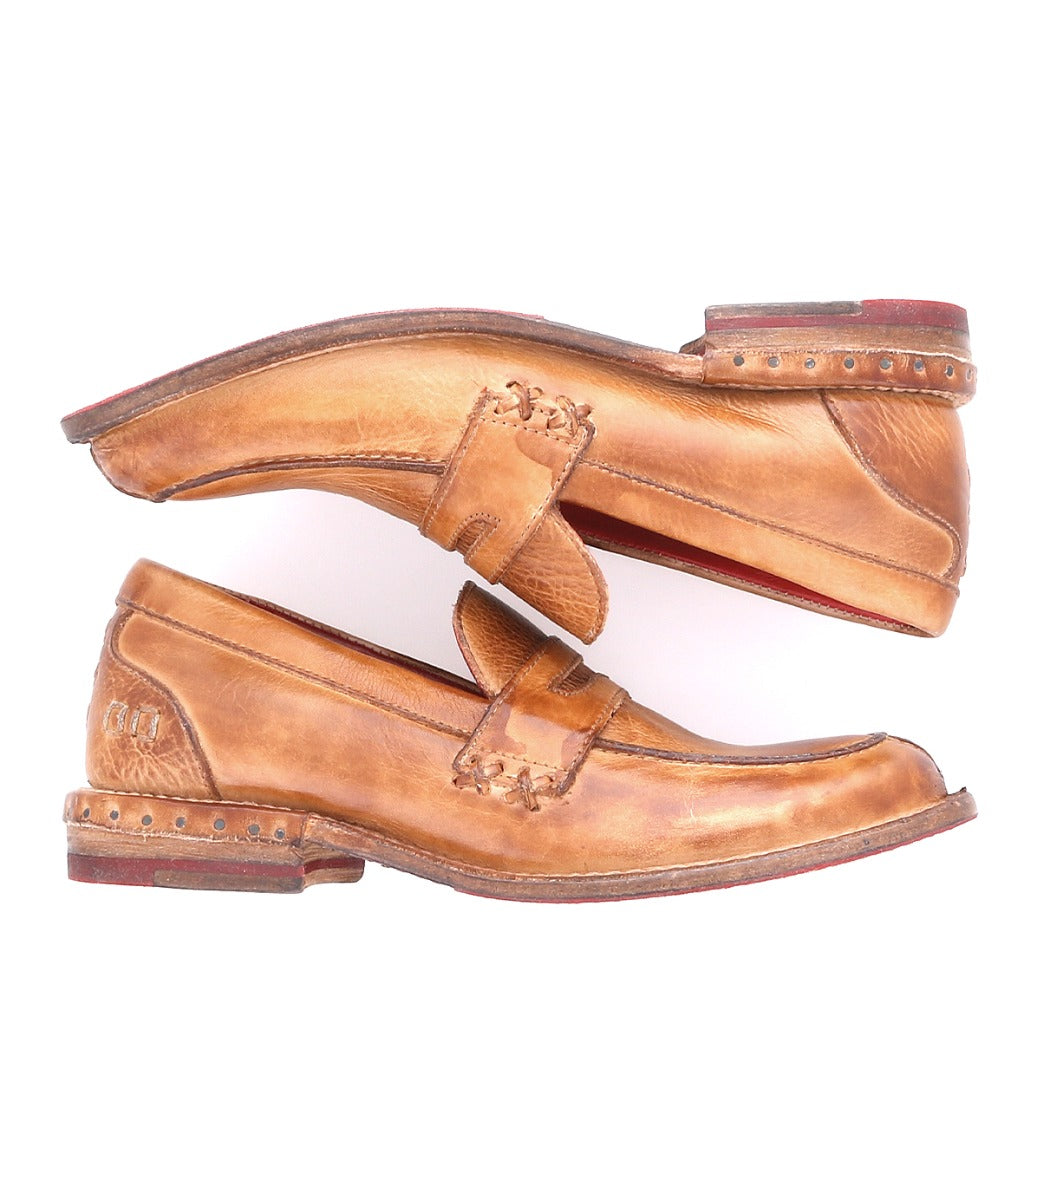 A pair of Bed Stu Reina women's brown loafers with studded soles.